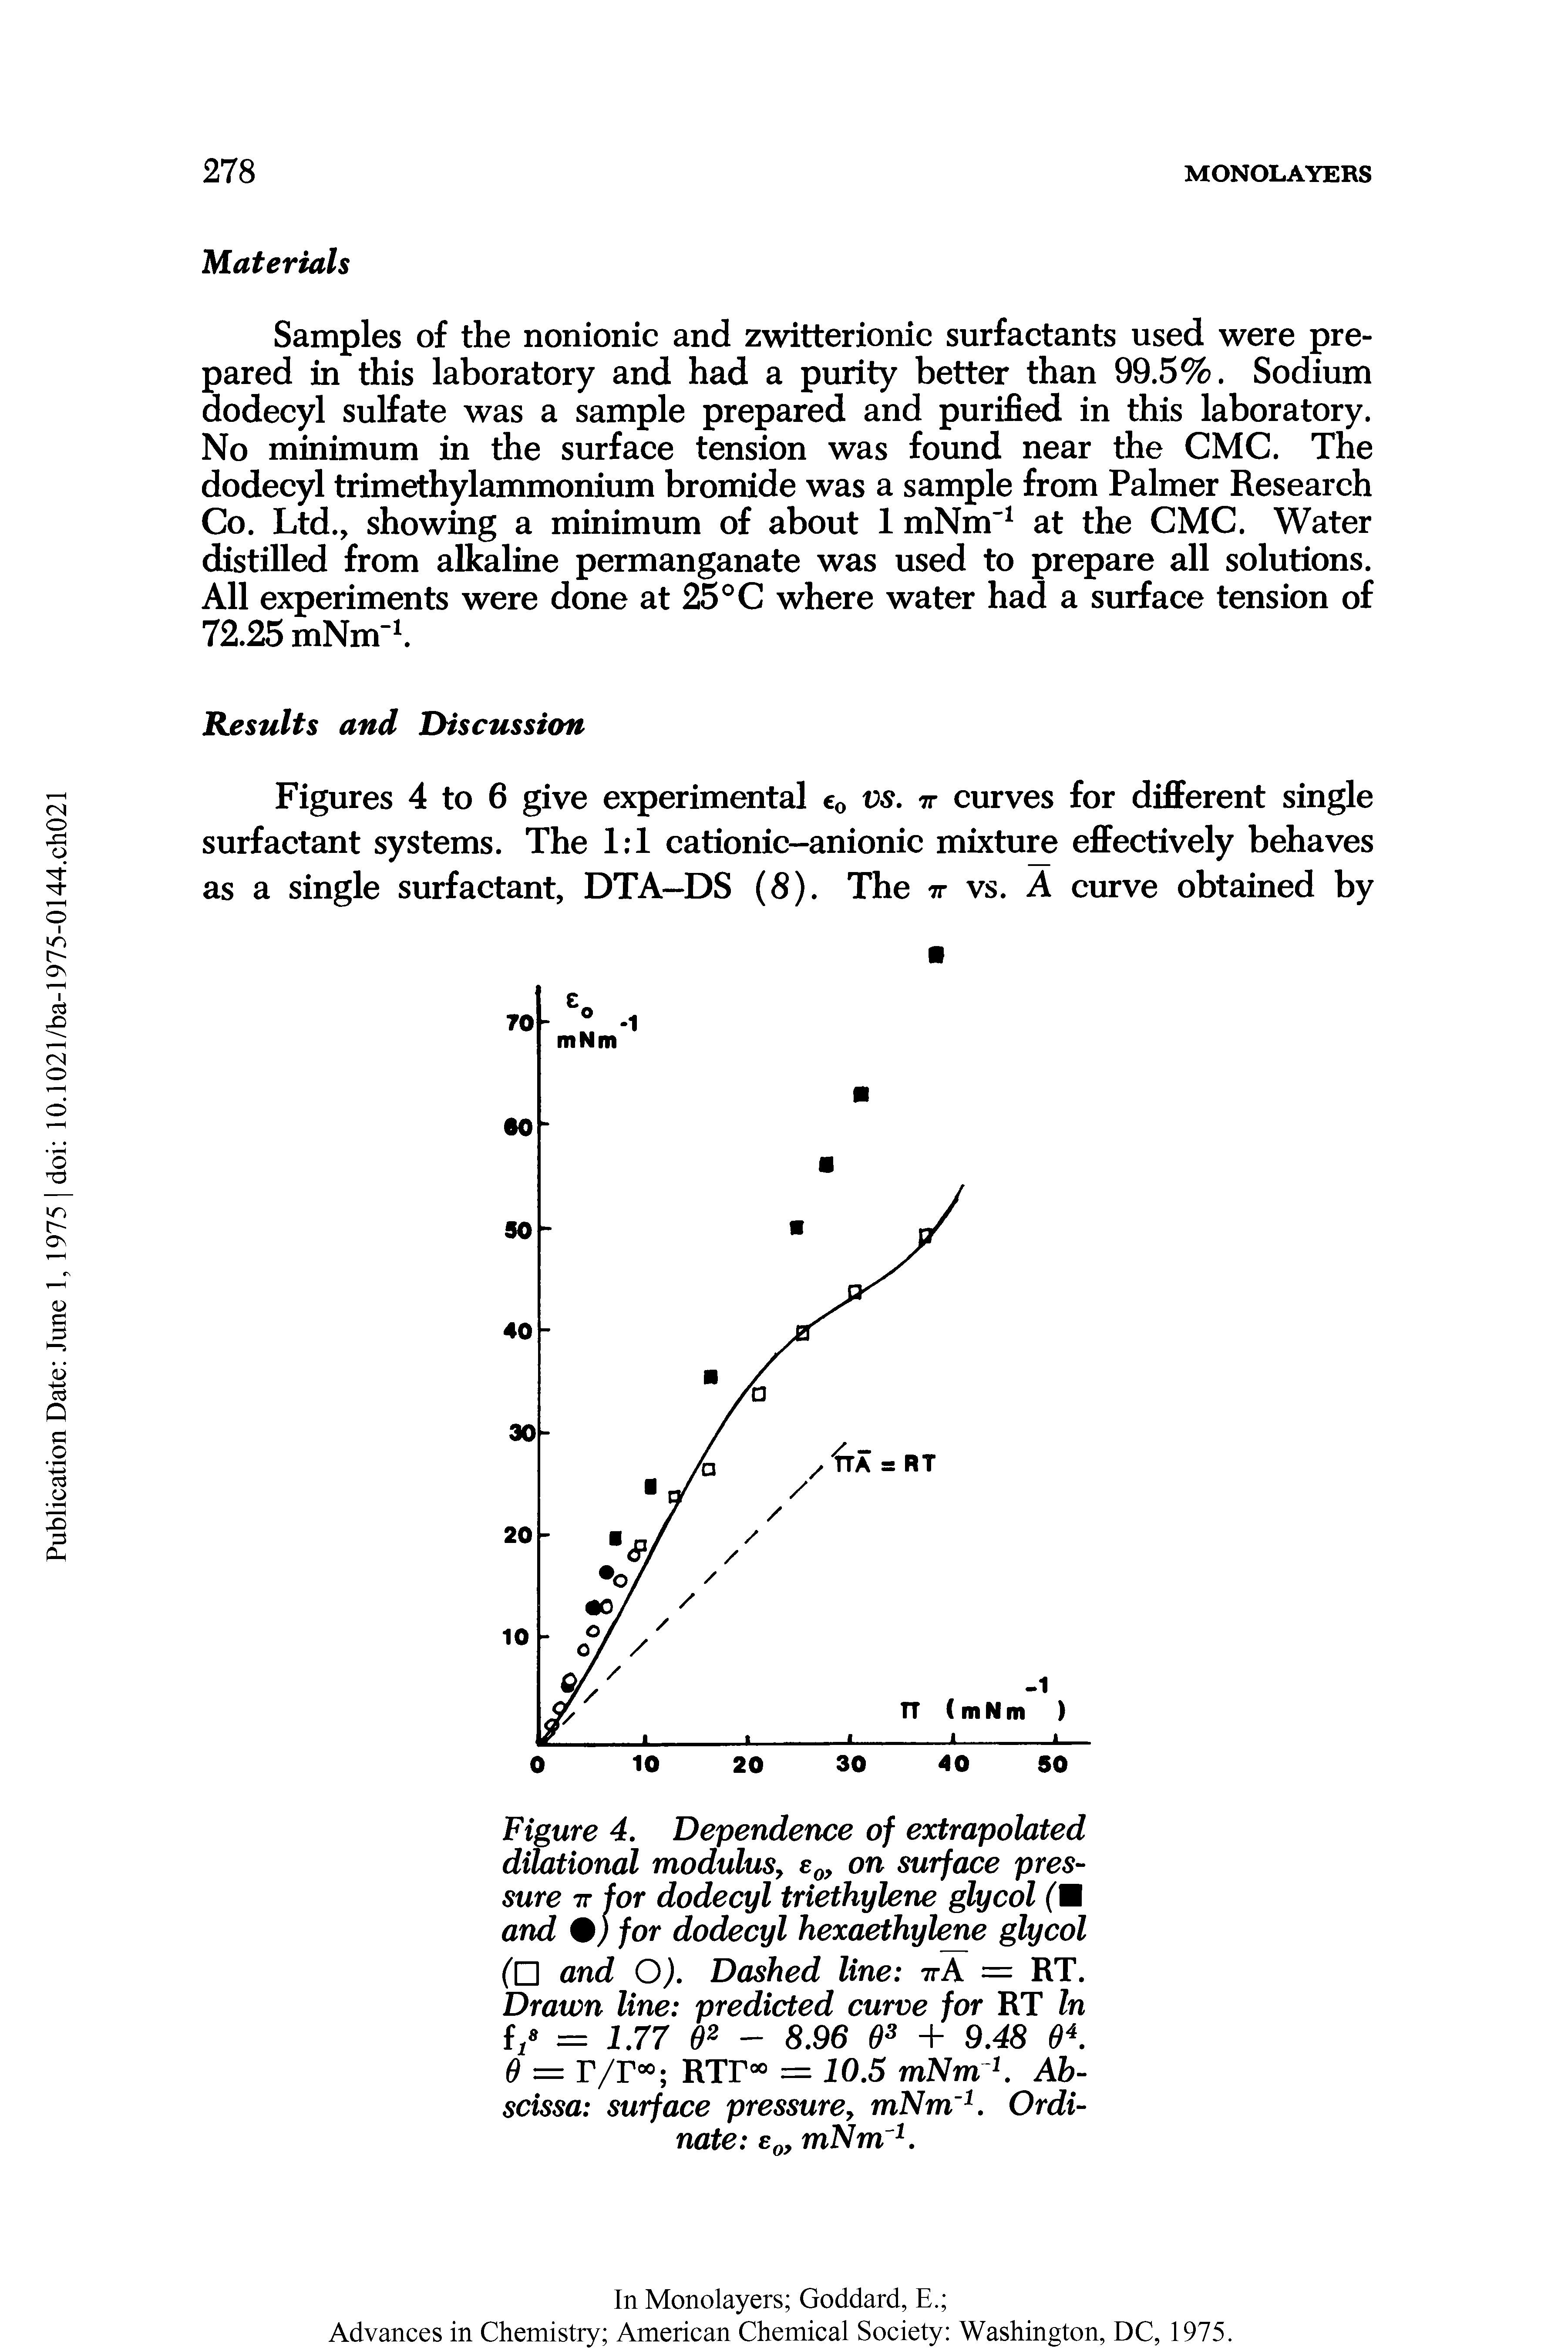 Figure 4. Dependence of extrapolated dilational modulus, e0, on surface pressure 7r for dodecyl triethylene glycol (M and ) for dodecyl hexaethylene glycol ( and O). Dashed line 7rA = RT. Drawn line predicted curve for RT In f/ = 1.77 02 - 8.96 63 + 9.48 04. 0 = r/r°° RTr°° = 10.5 mNm1. Abscissa surface pressure, mNm1. Ordinate e0, mNm1.